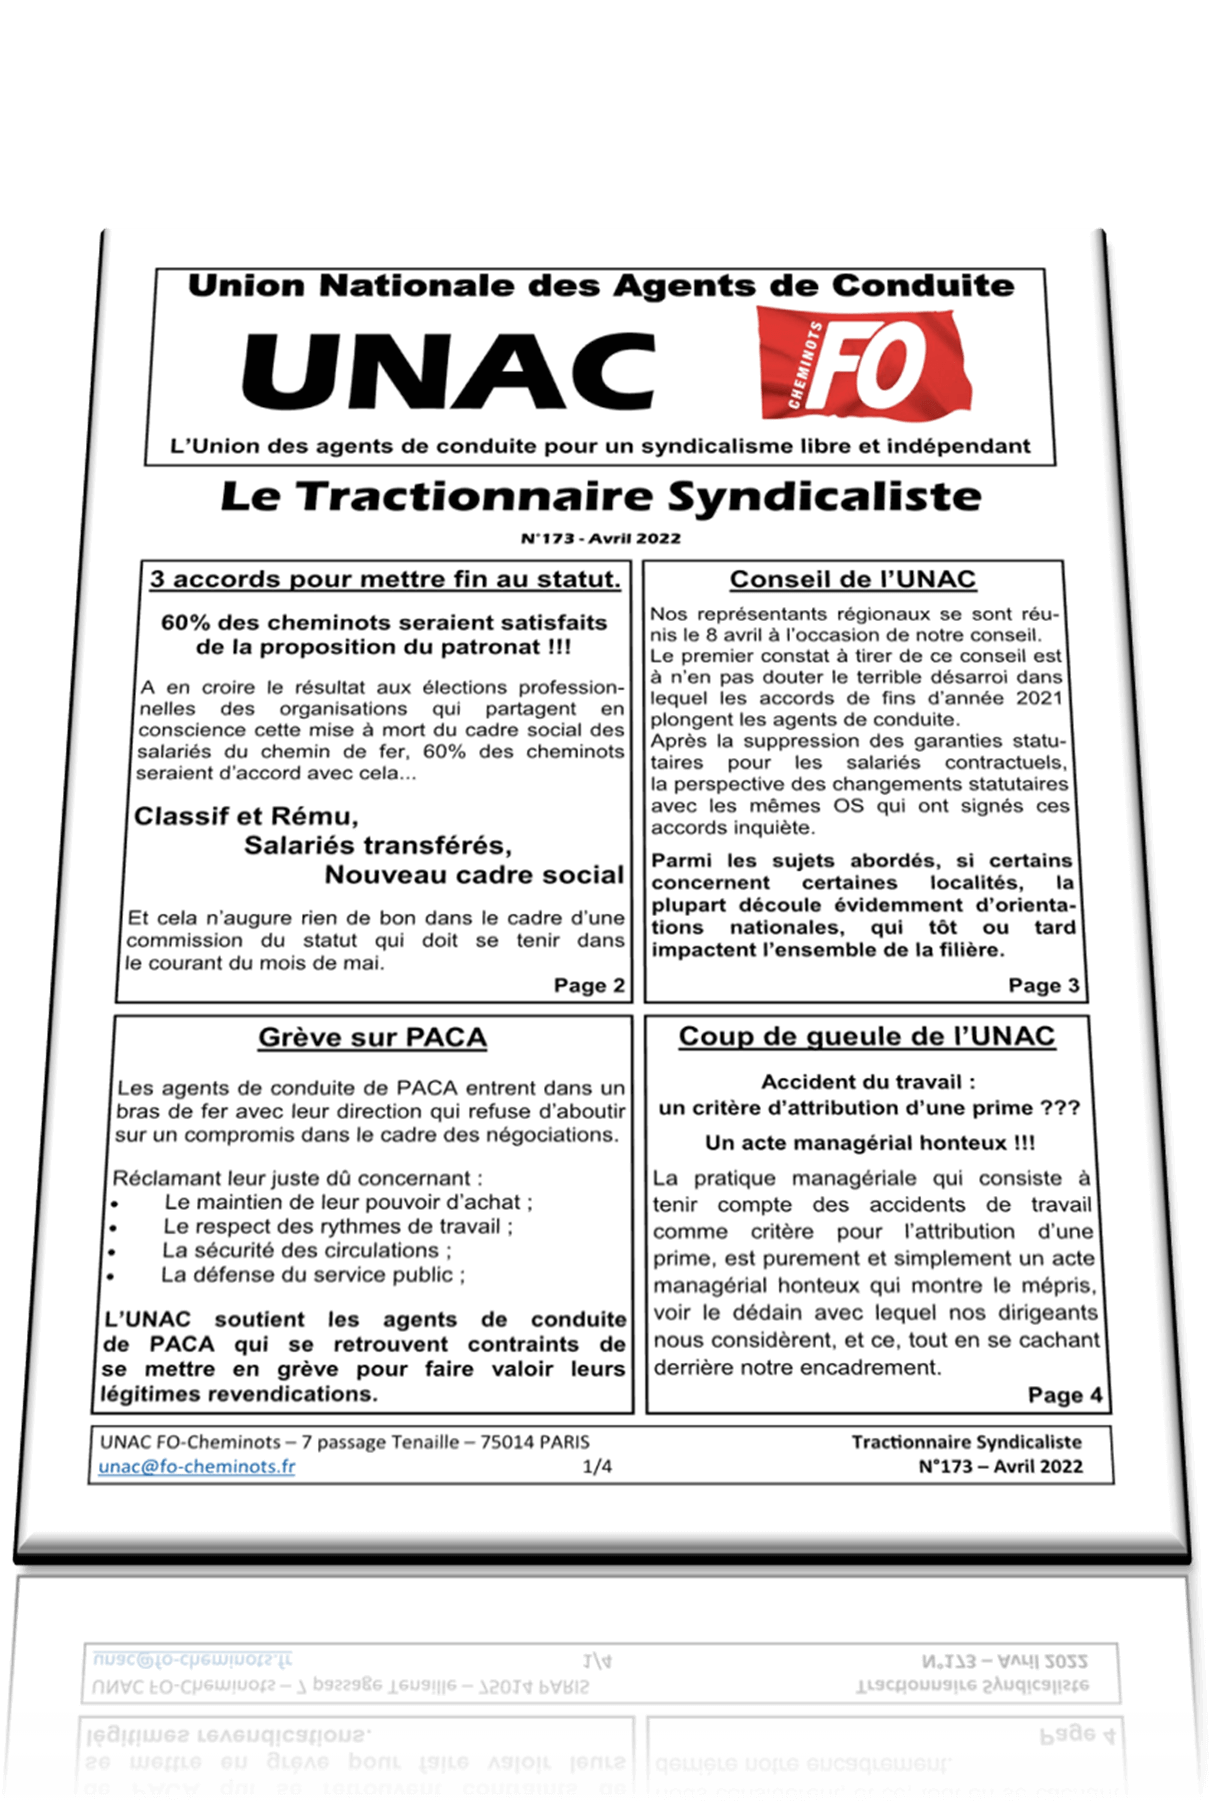 Le tractionnaire syndicaliste n°174 – Avril 2022